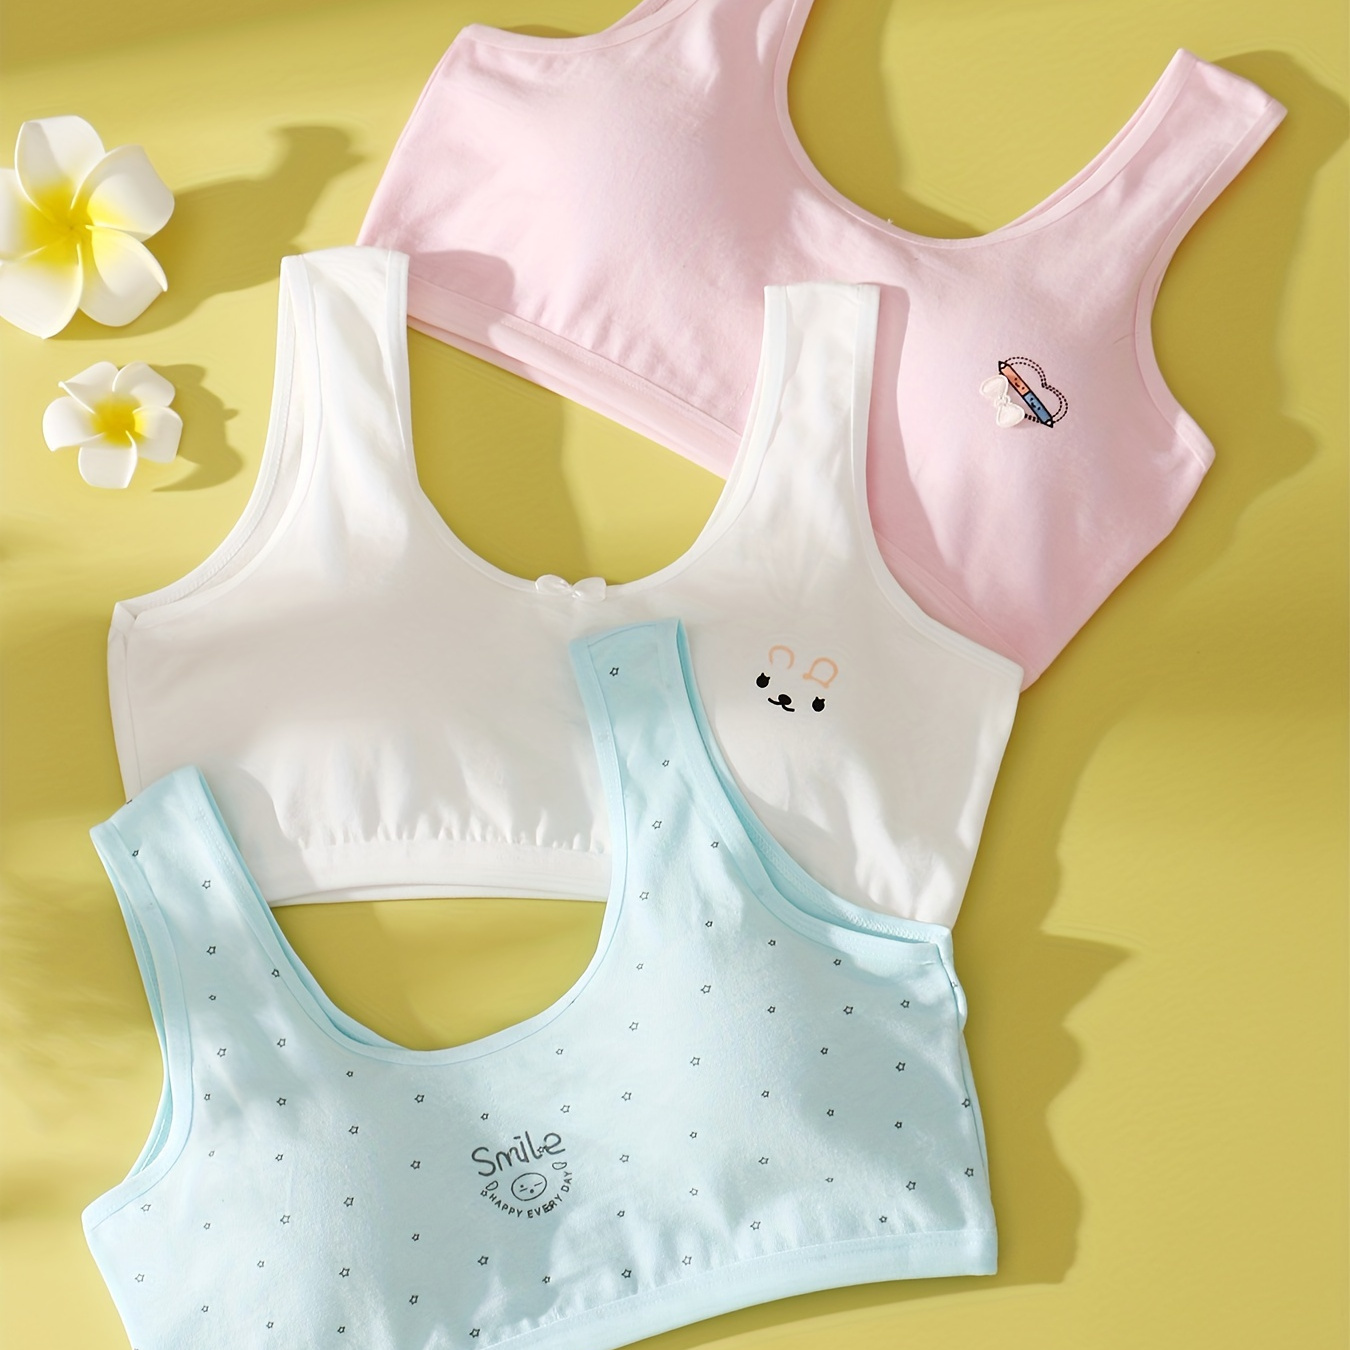 Middle and large children's students' development period underwear female  junior high school girl bra small vest cartoon cute tube top pure cotton  wrapped chest